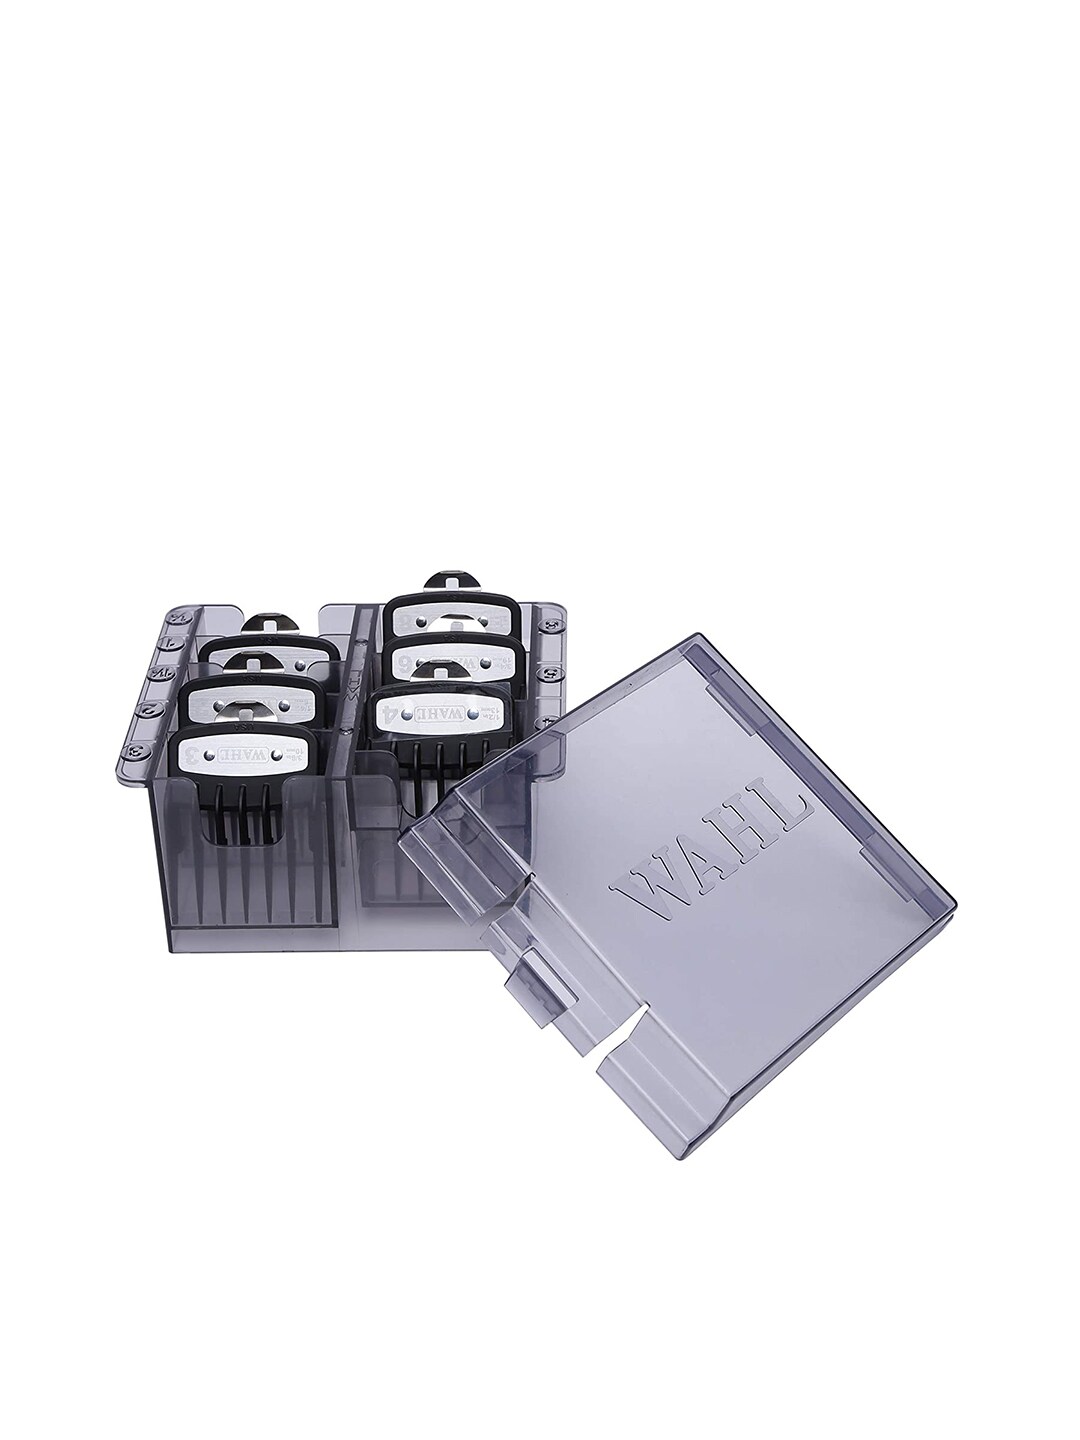 WAHL Guide Comb Storage Box Price in India